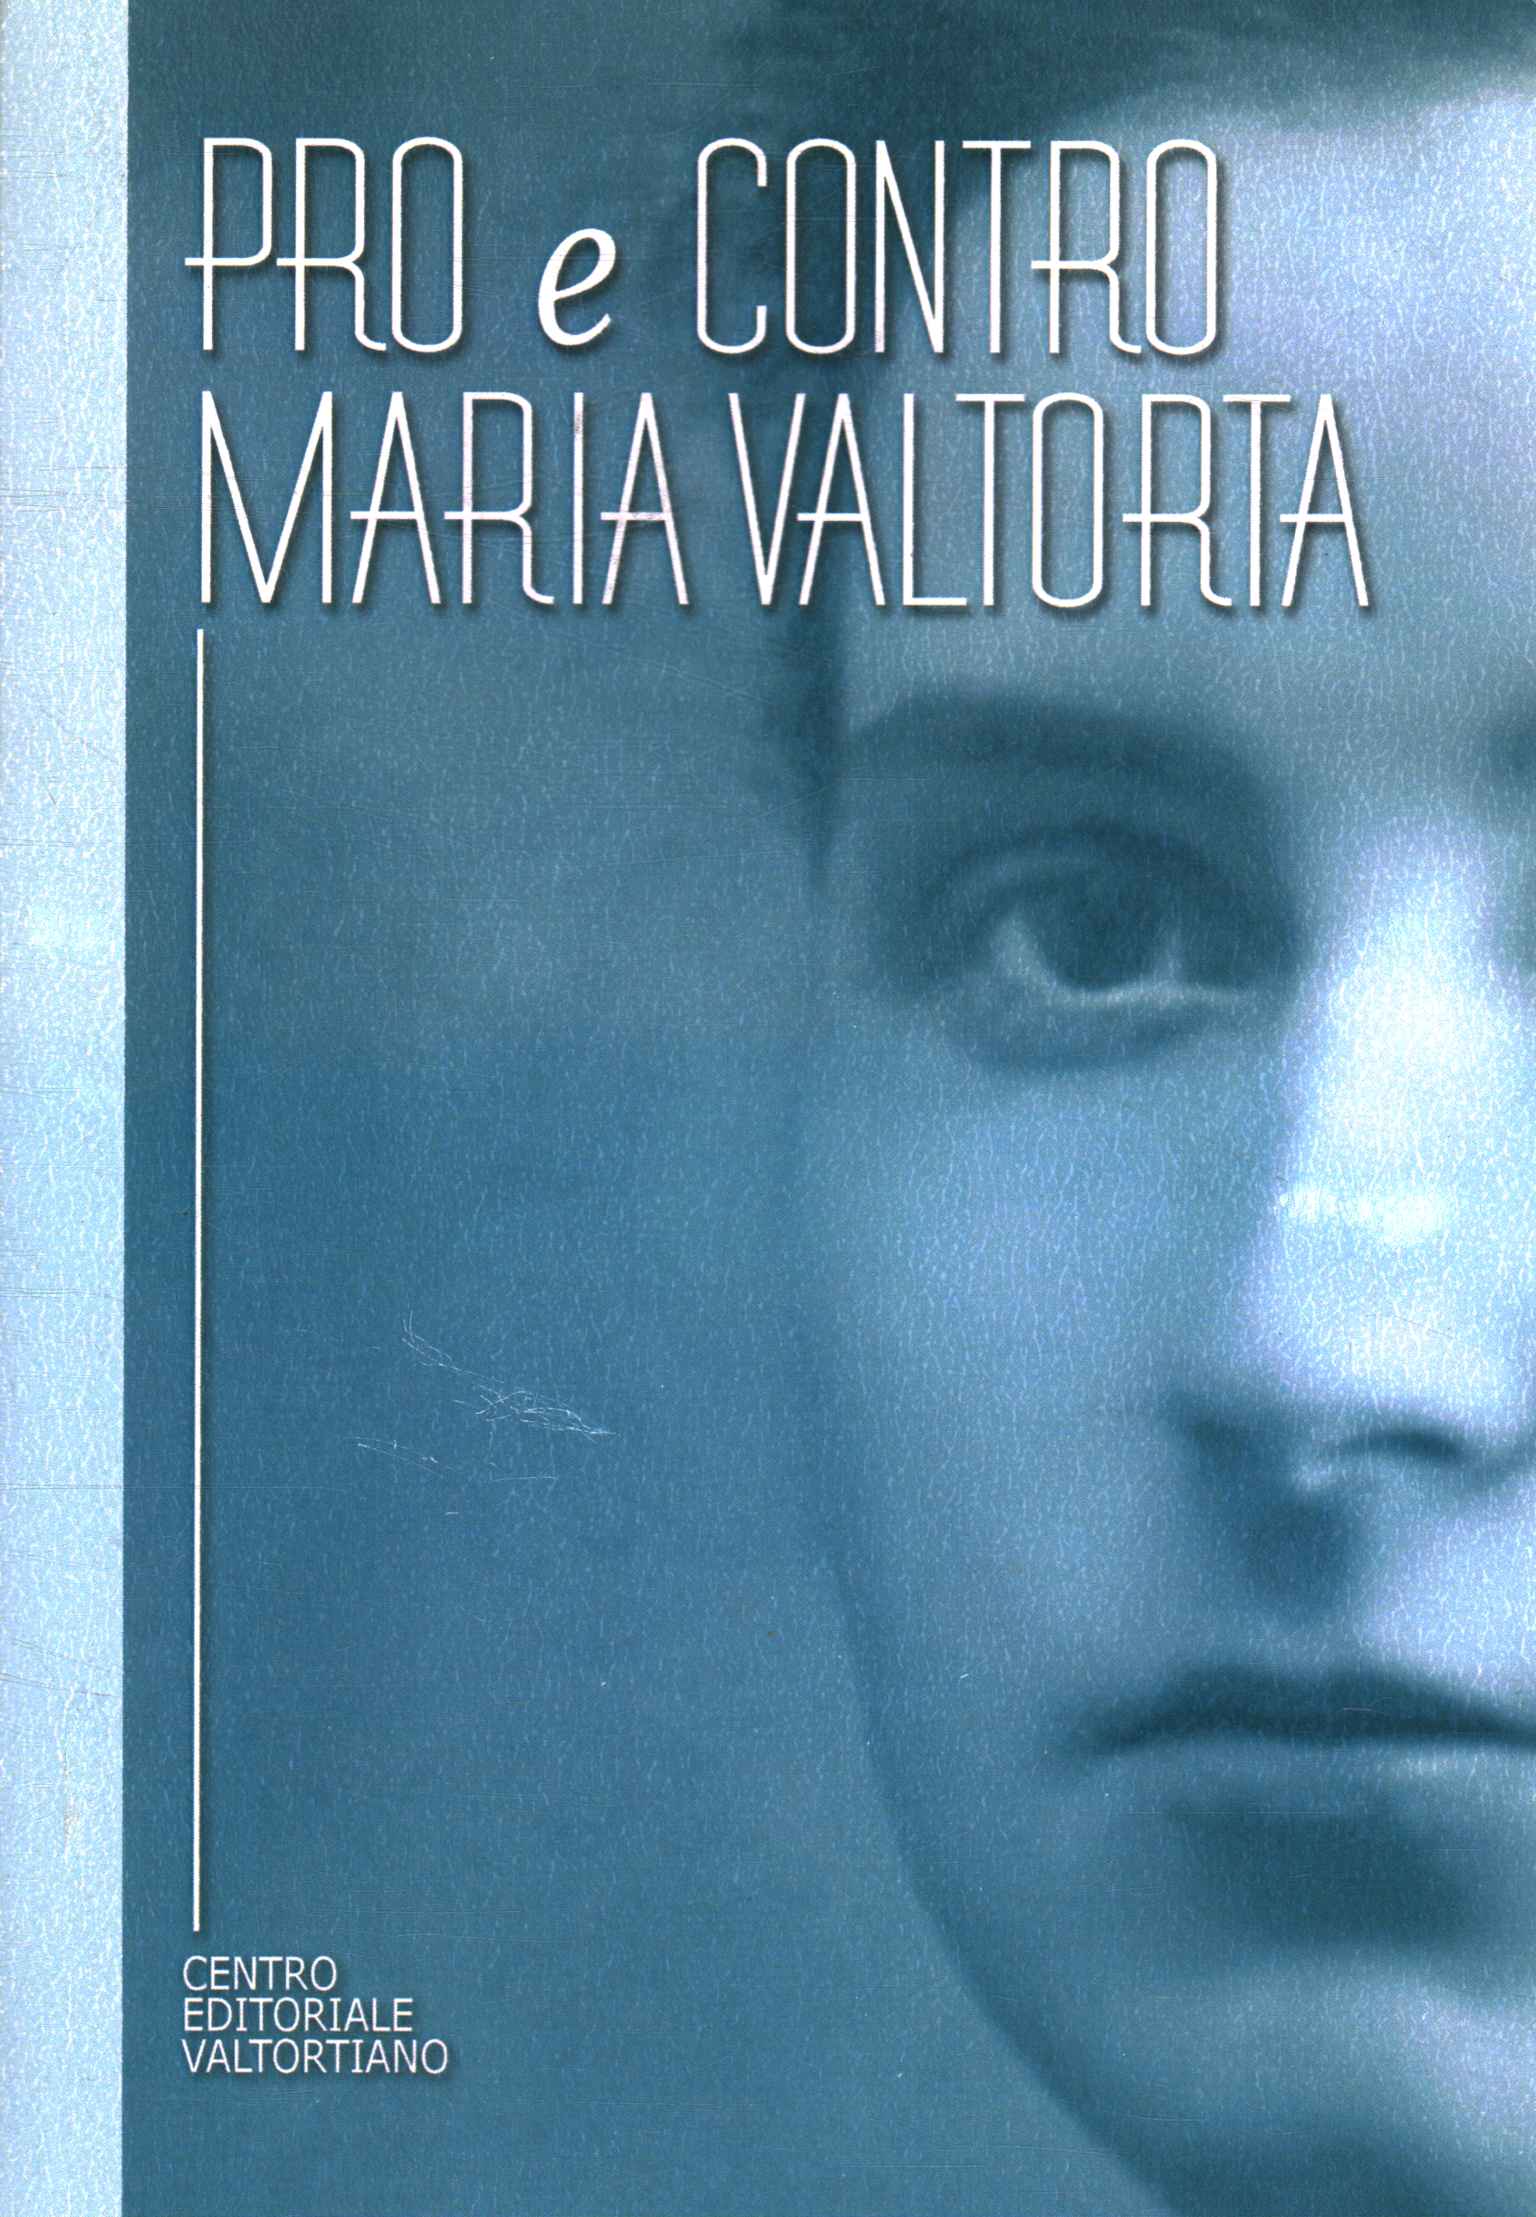 For and against Maria Valtorta